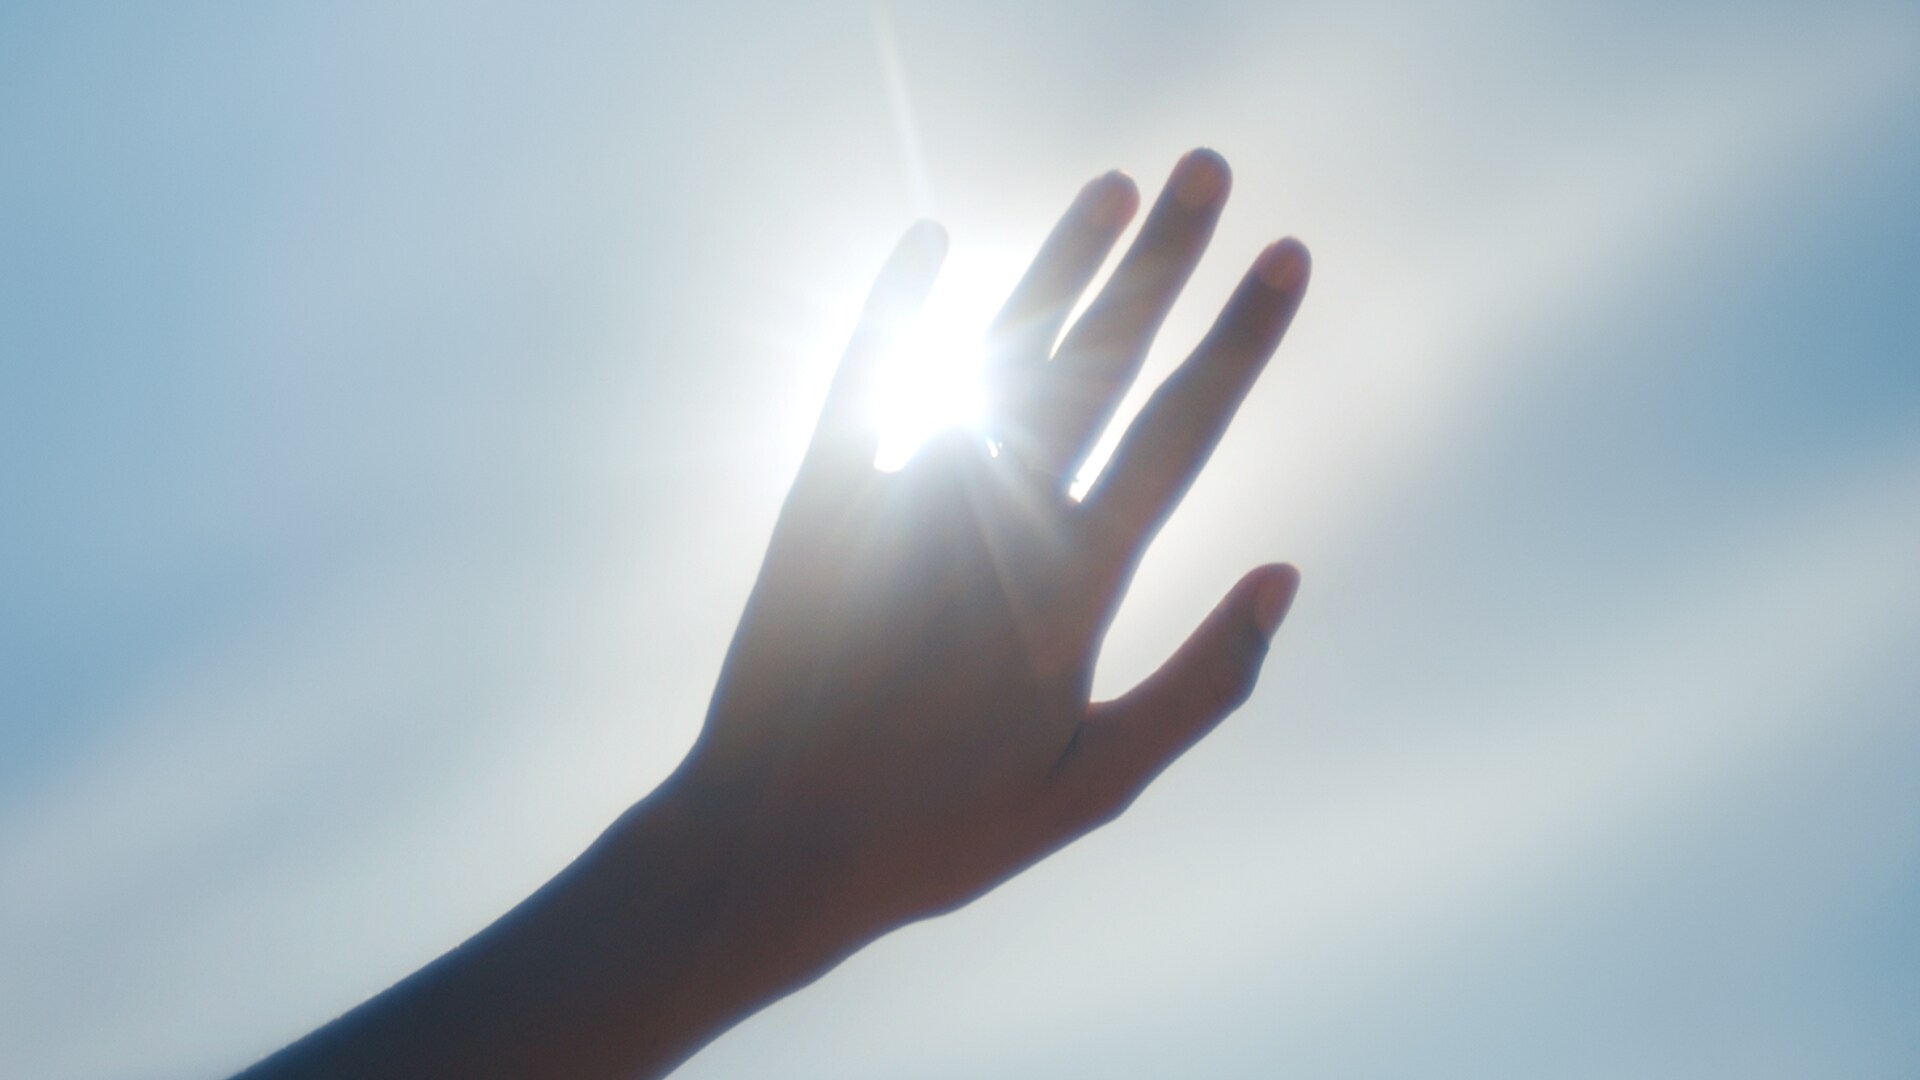 Sunlight flashing through the fingers of a hand.